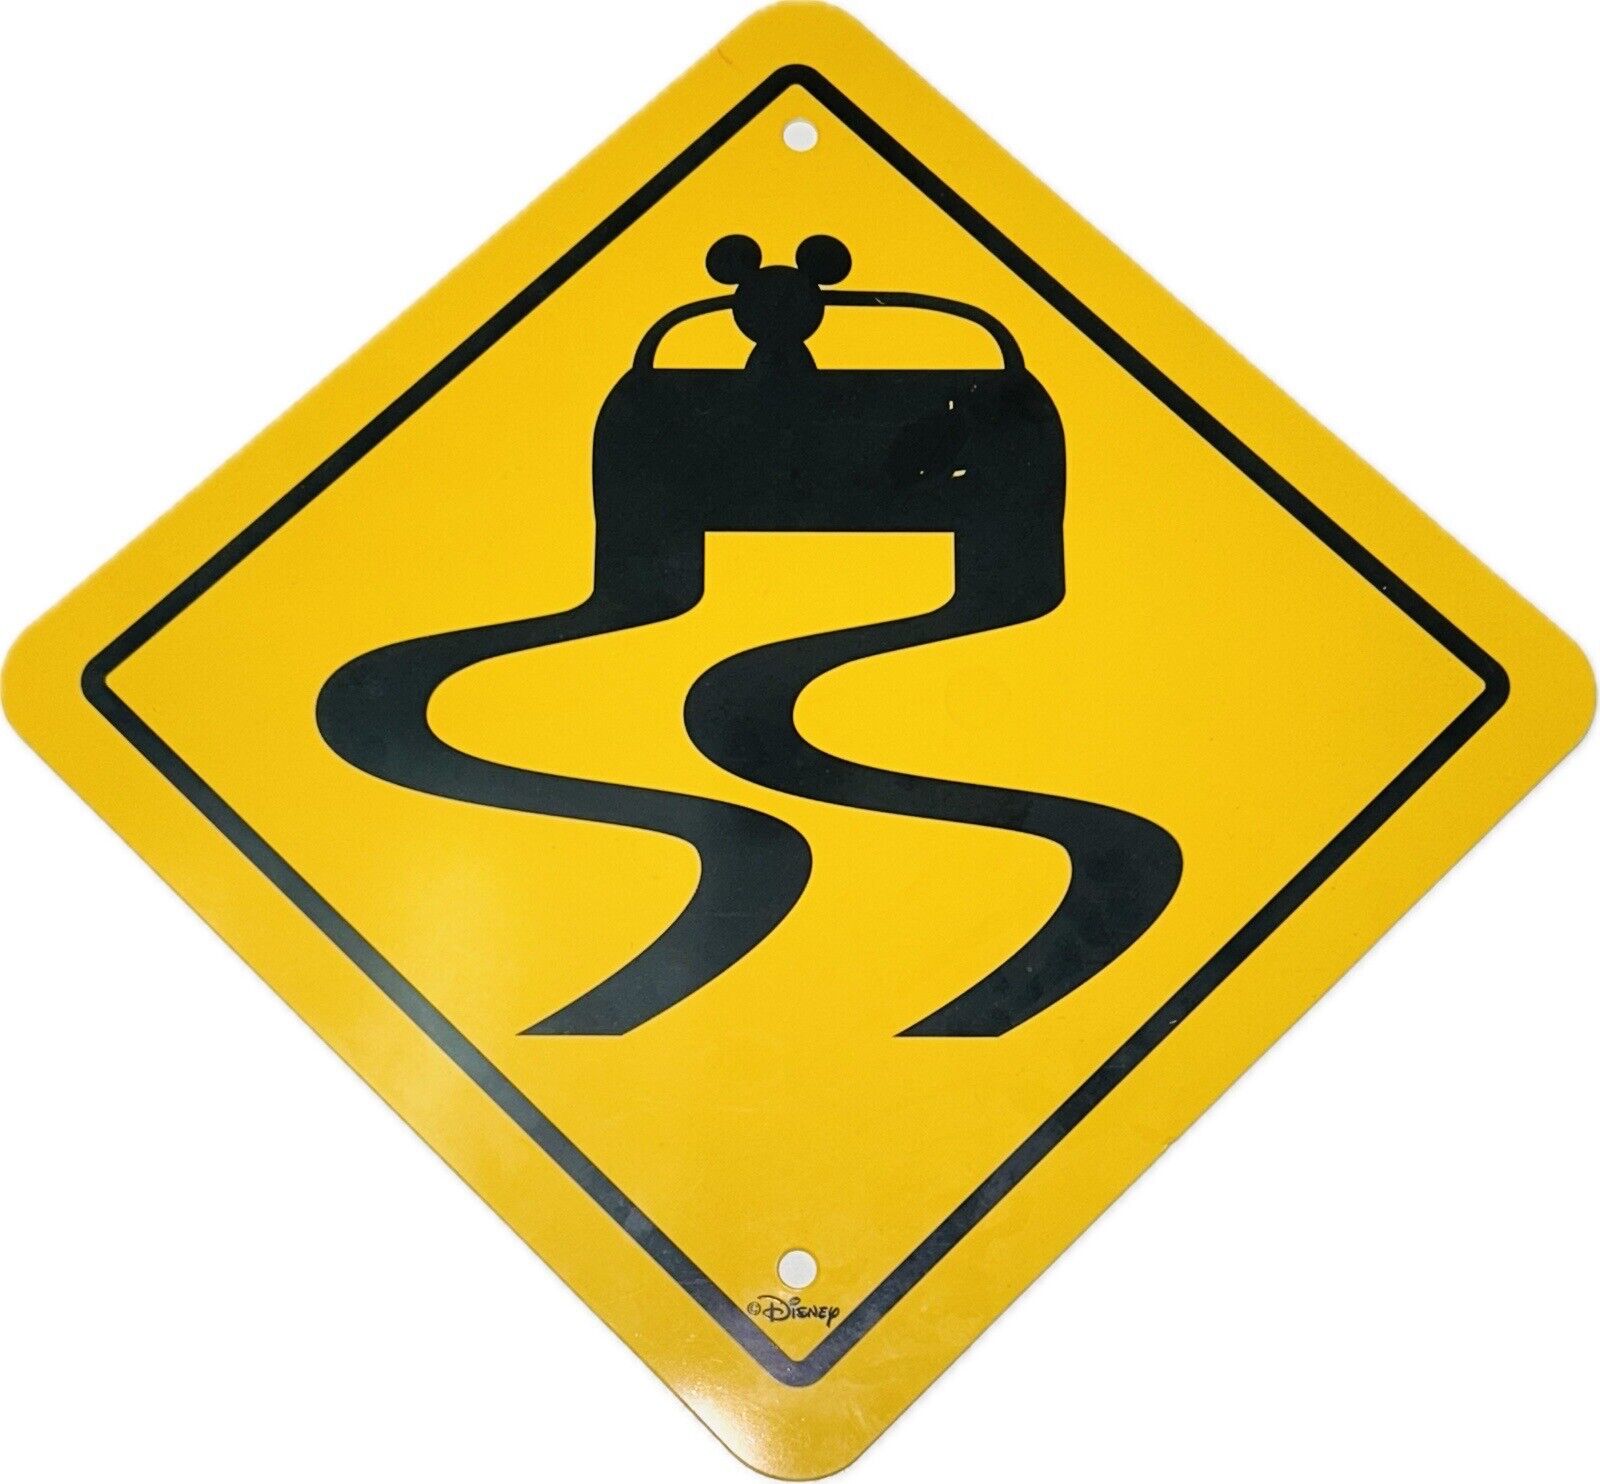 Disney TEST TRACK Mickey Mouse Caution Sign Slippery Curvy Road Driving Car